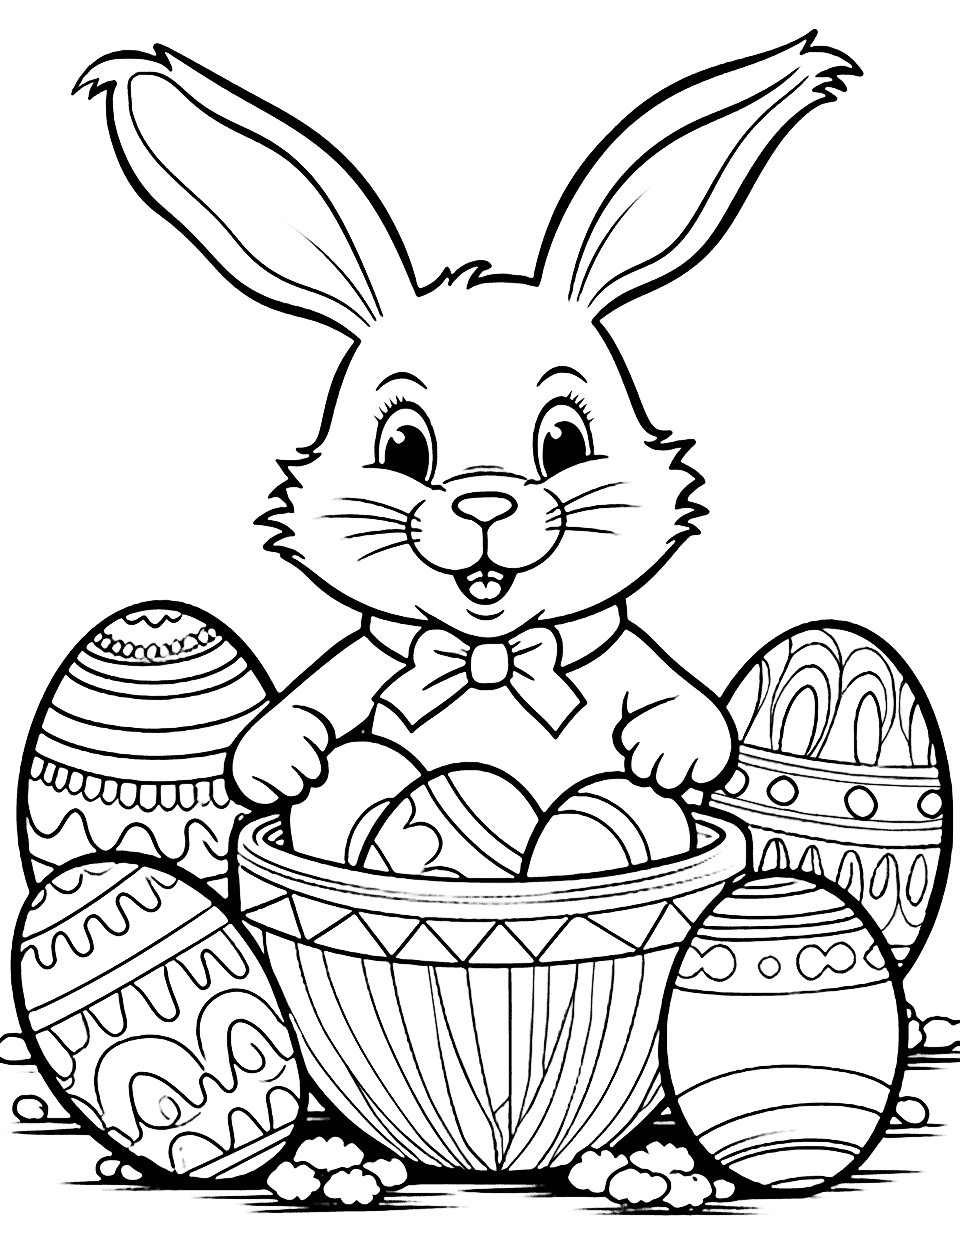 Happy Easter Bunny Coloring Page - A cheerful bunny with a basket full of colorful Easter eggs and a “Happy Easter” message.